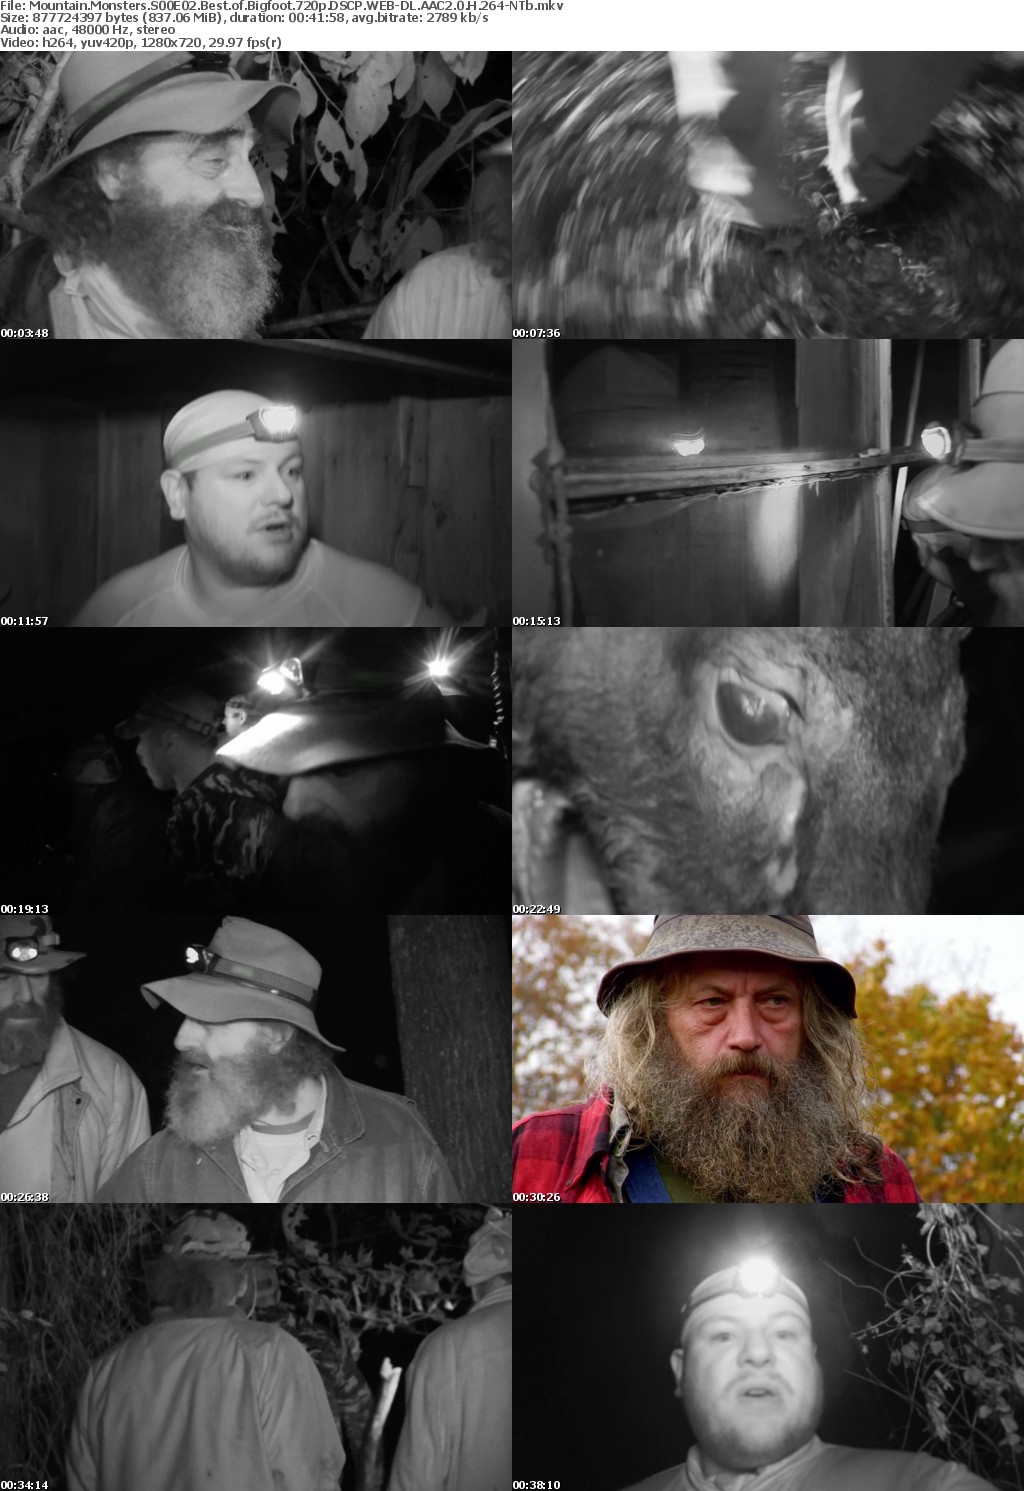 Mountain Monsters S00E02 Best of Bigfoot 720p DSCP WEB-DL AAC2 0 H 264-NTb